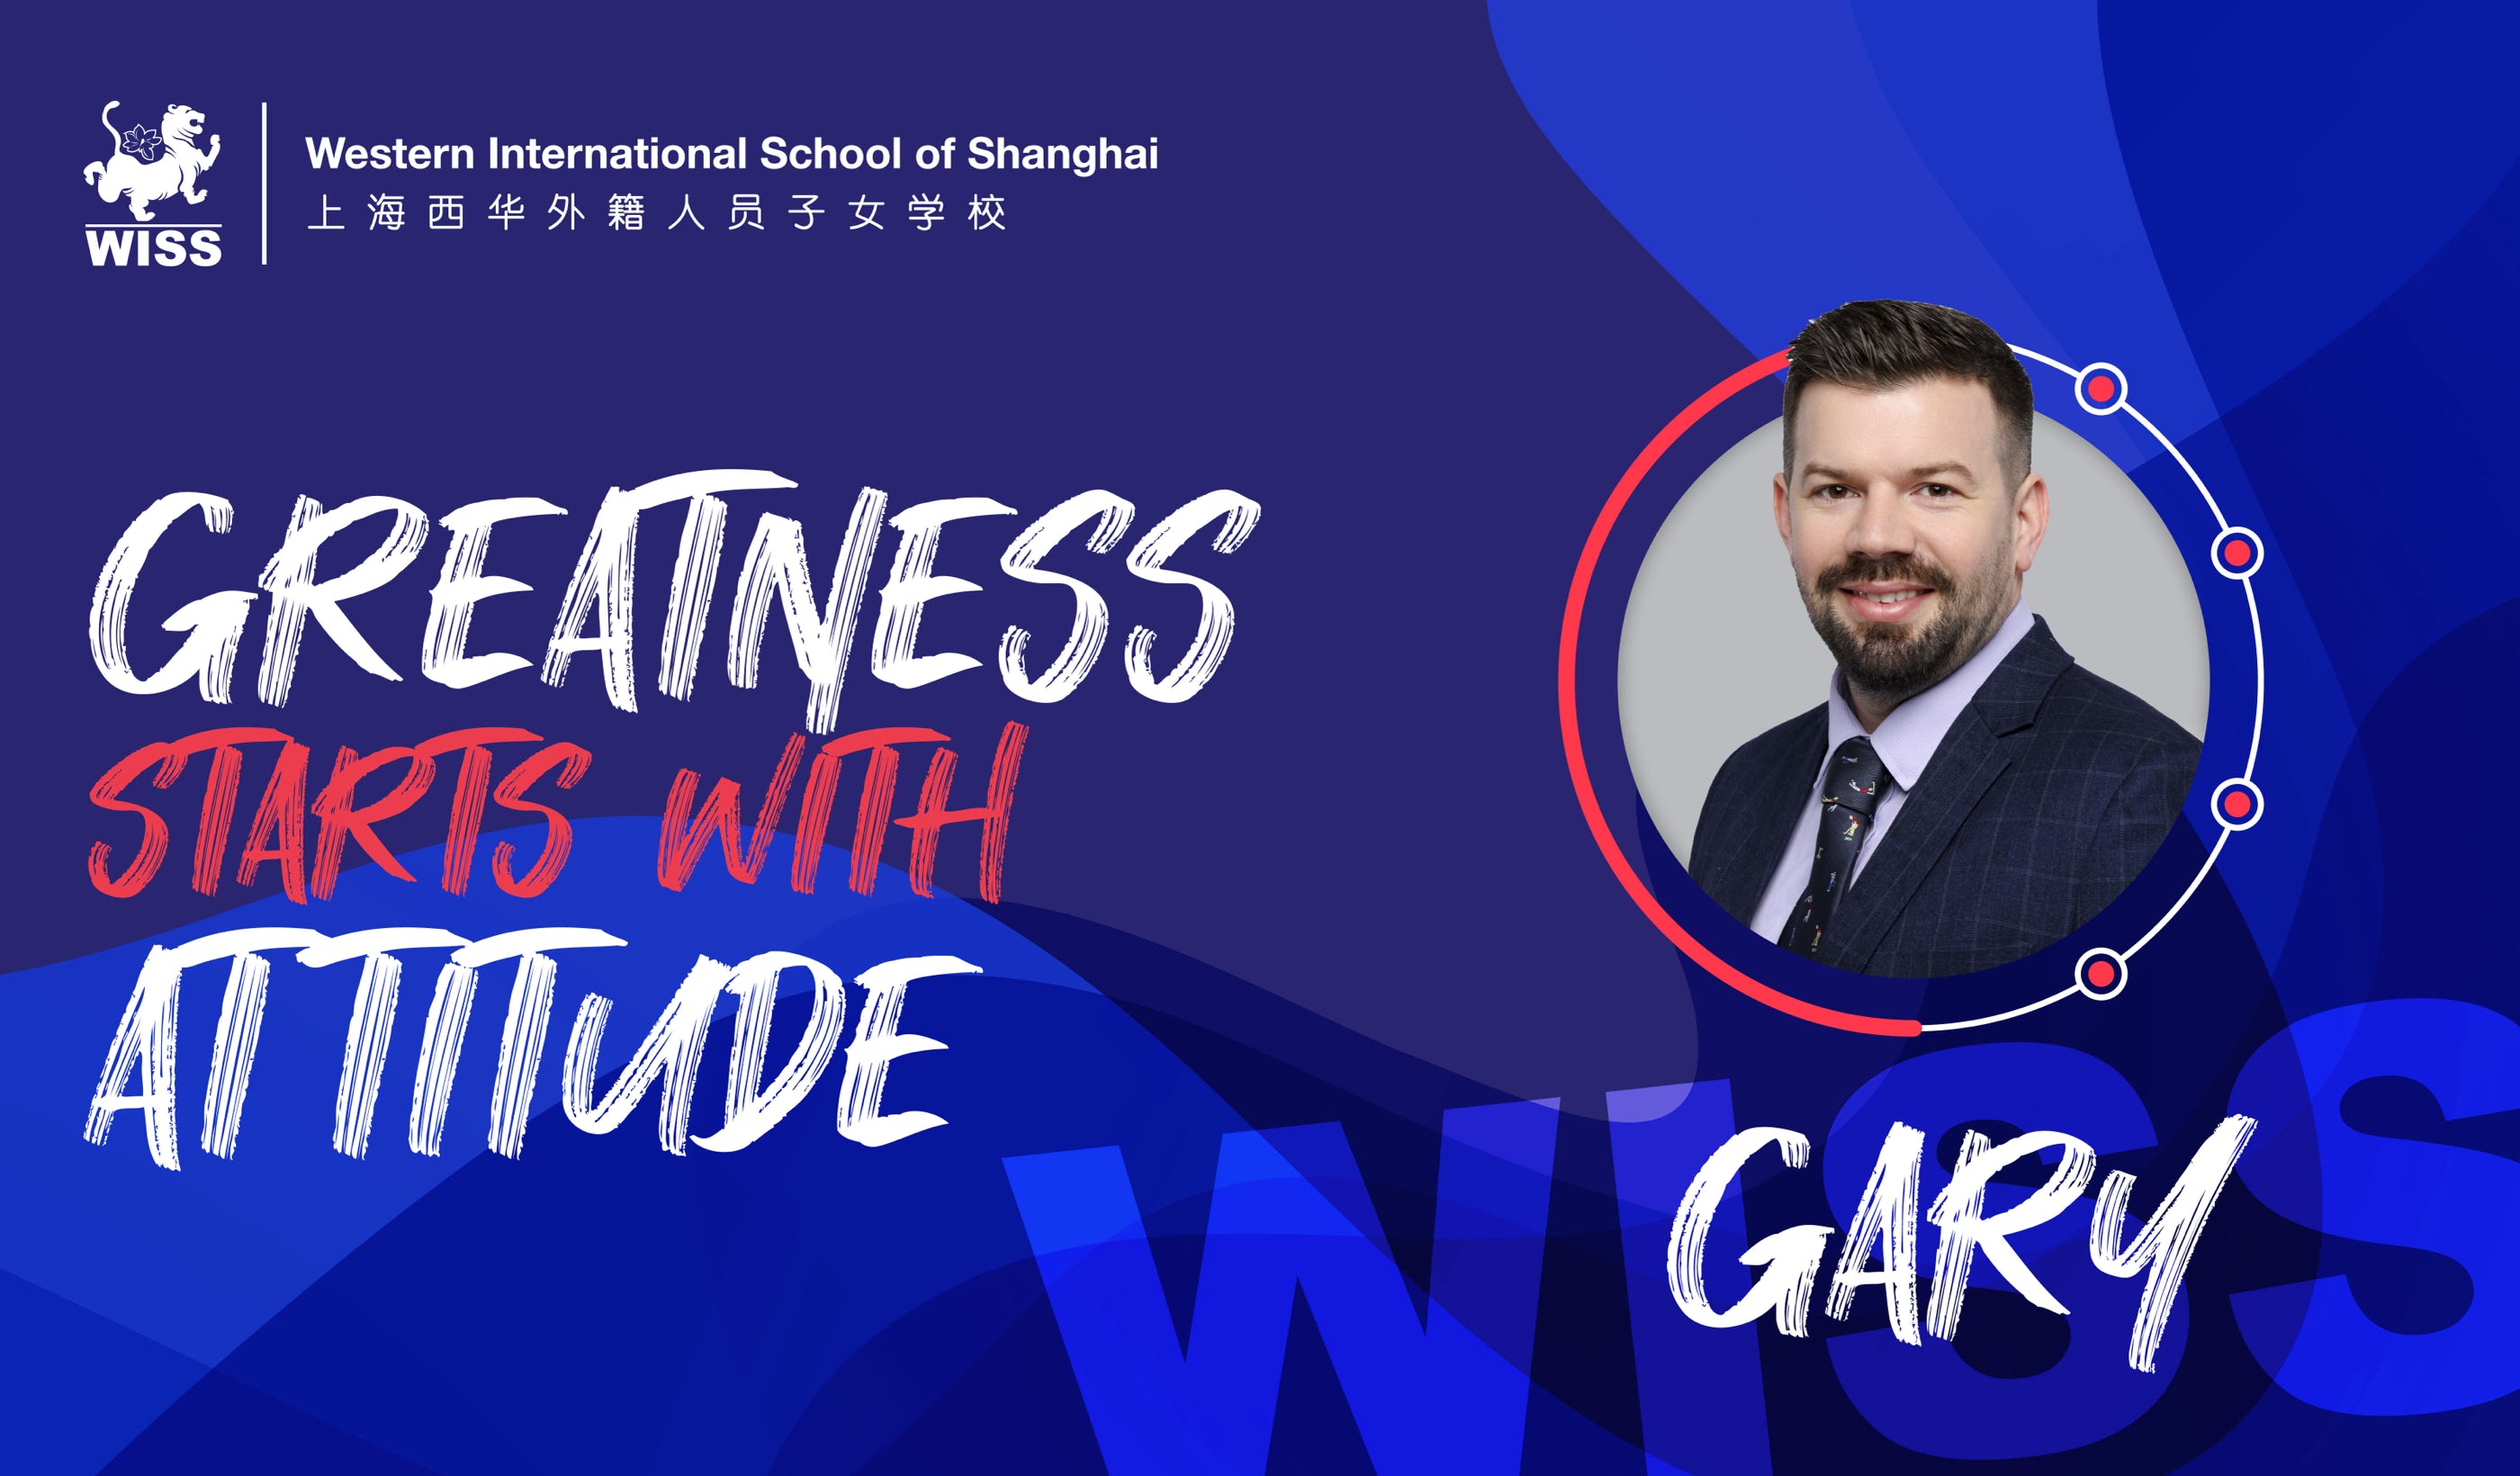 In the latest installment of the "Greatness Starts With Attitude" series, we delve into the inspiring journey of Gary Halcrow, a dedicated Career-Related Programme (IBCP) coordinator at the Western International School of Shanghai (WISS) with a wealth of experience in teaching and a passion for guiding students towards holistic success.  Gary's path to education began with a love for sports, which ignited his initial interest in teaching physical education. Throughout his 10-year teaching career, spanning Scotland, Saudi Arabia, China, and now at WISS for five years, Gary has evolved into a dynamic IB teacher who values academic excellence and the development of essential character traits in his students.